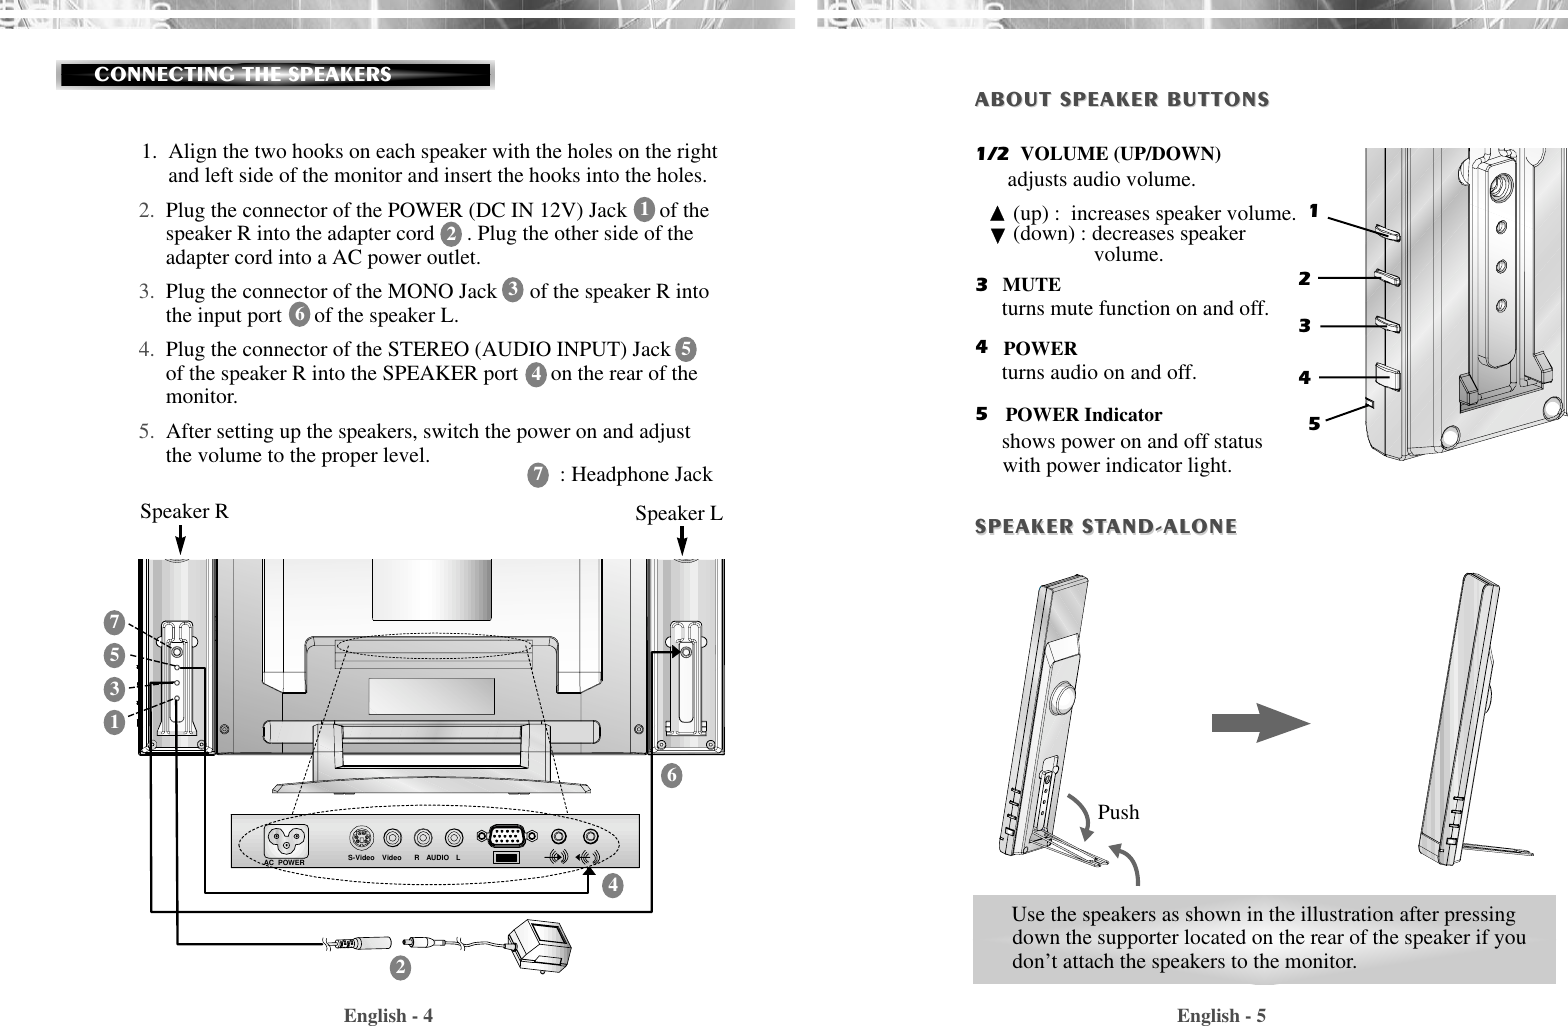 English - 5English - 4CONNECTING THE SPEAKERSUse the speakers as shown in the illustration after pressingdown the supporter located on the rear of the speaker if youdon’t attach the speakers to the monitor.12345ABOUT SPEAKER BUTTONSABOUT SPEAKER BUTTONSSPEAKER STSPEAKER STAND-ALONEAND-ALONEPushAC  POWER S-Video Video AUDIORLSpeaker R Speaker L1.  Align the two hooks on each speaker with the holes on the rightand left side of the monitor and insert the hooks into the holes.2. Plug the connector of the POWER (DC IN 12V) Jack      of thespeaker R into the adapter cord      . Plug the other side of theadapter cord into a AC power outlet.3. Plug the connector of the MONO Jack      of the speaker R intothe input port      of the speaker L.4. Plug the connector of the STEREO (AUDIO INPUT) Jackof the speaker R into the SPEAKER port      on the rear of themonitor.5. After setting up the speakers, switch the power on and adjustthe volume to the proper level.11223344557766: Headphone JackVOLUME (UP/DOWN)MUTEPOWERPOWER Indicator1/2345adjusts audio volume.(up) :  increases speaker volume.(down) : decreases speaker volume.turns mute function on and off.turns audio on and off.shows power on and off statuswith power indicator light.